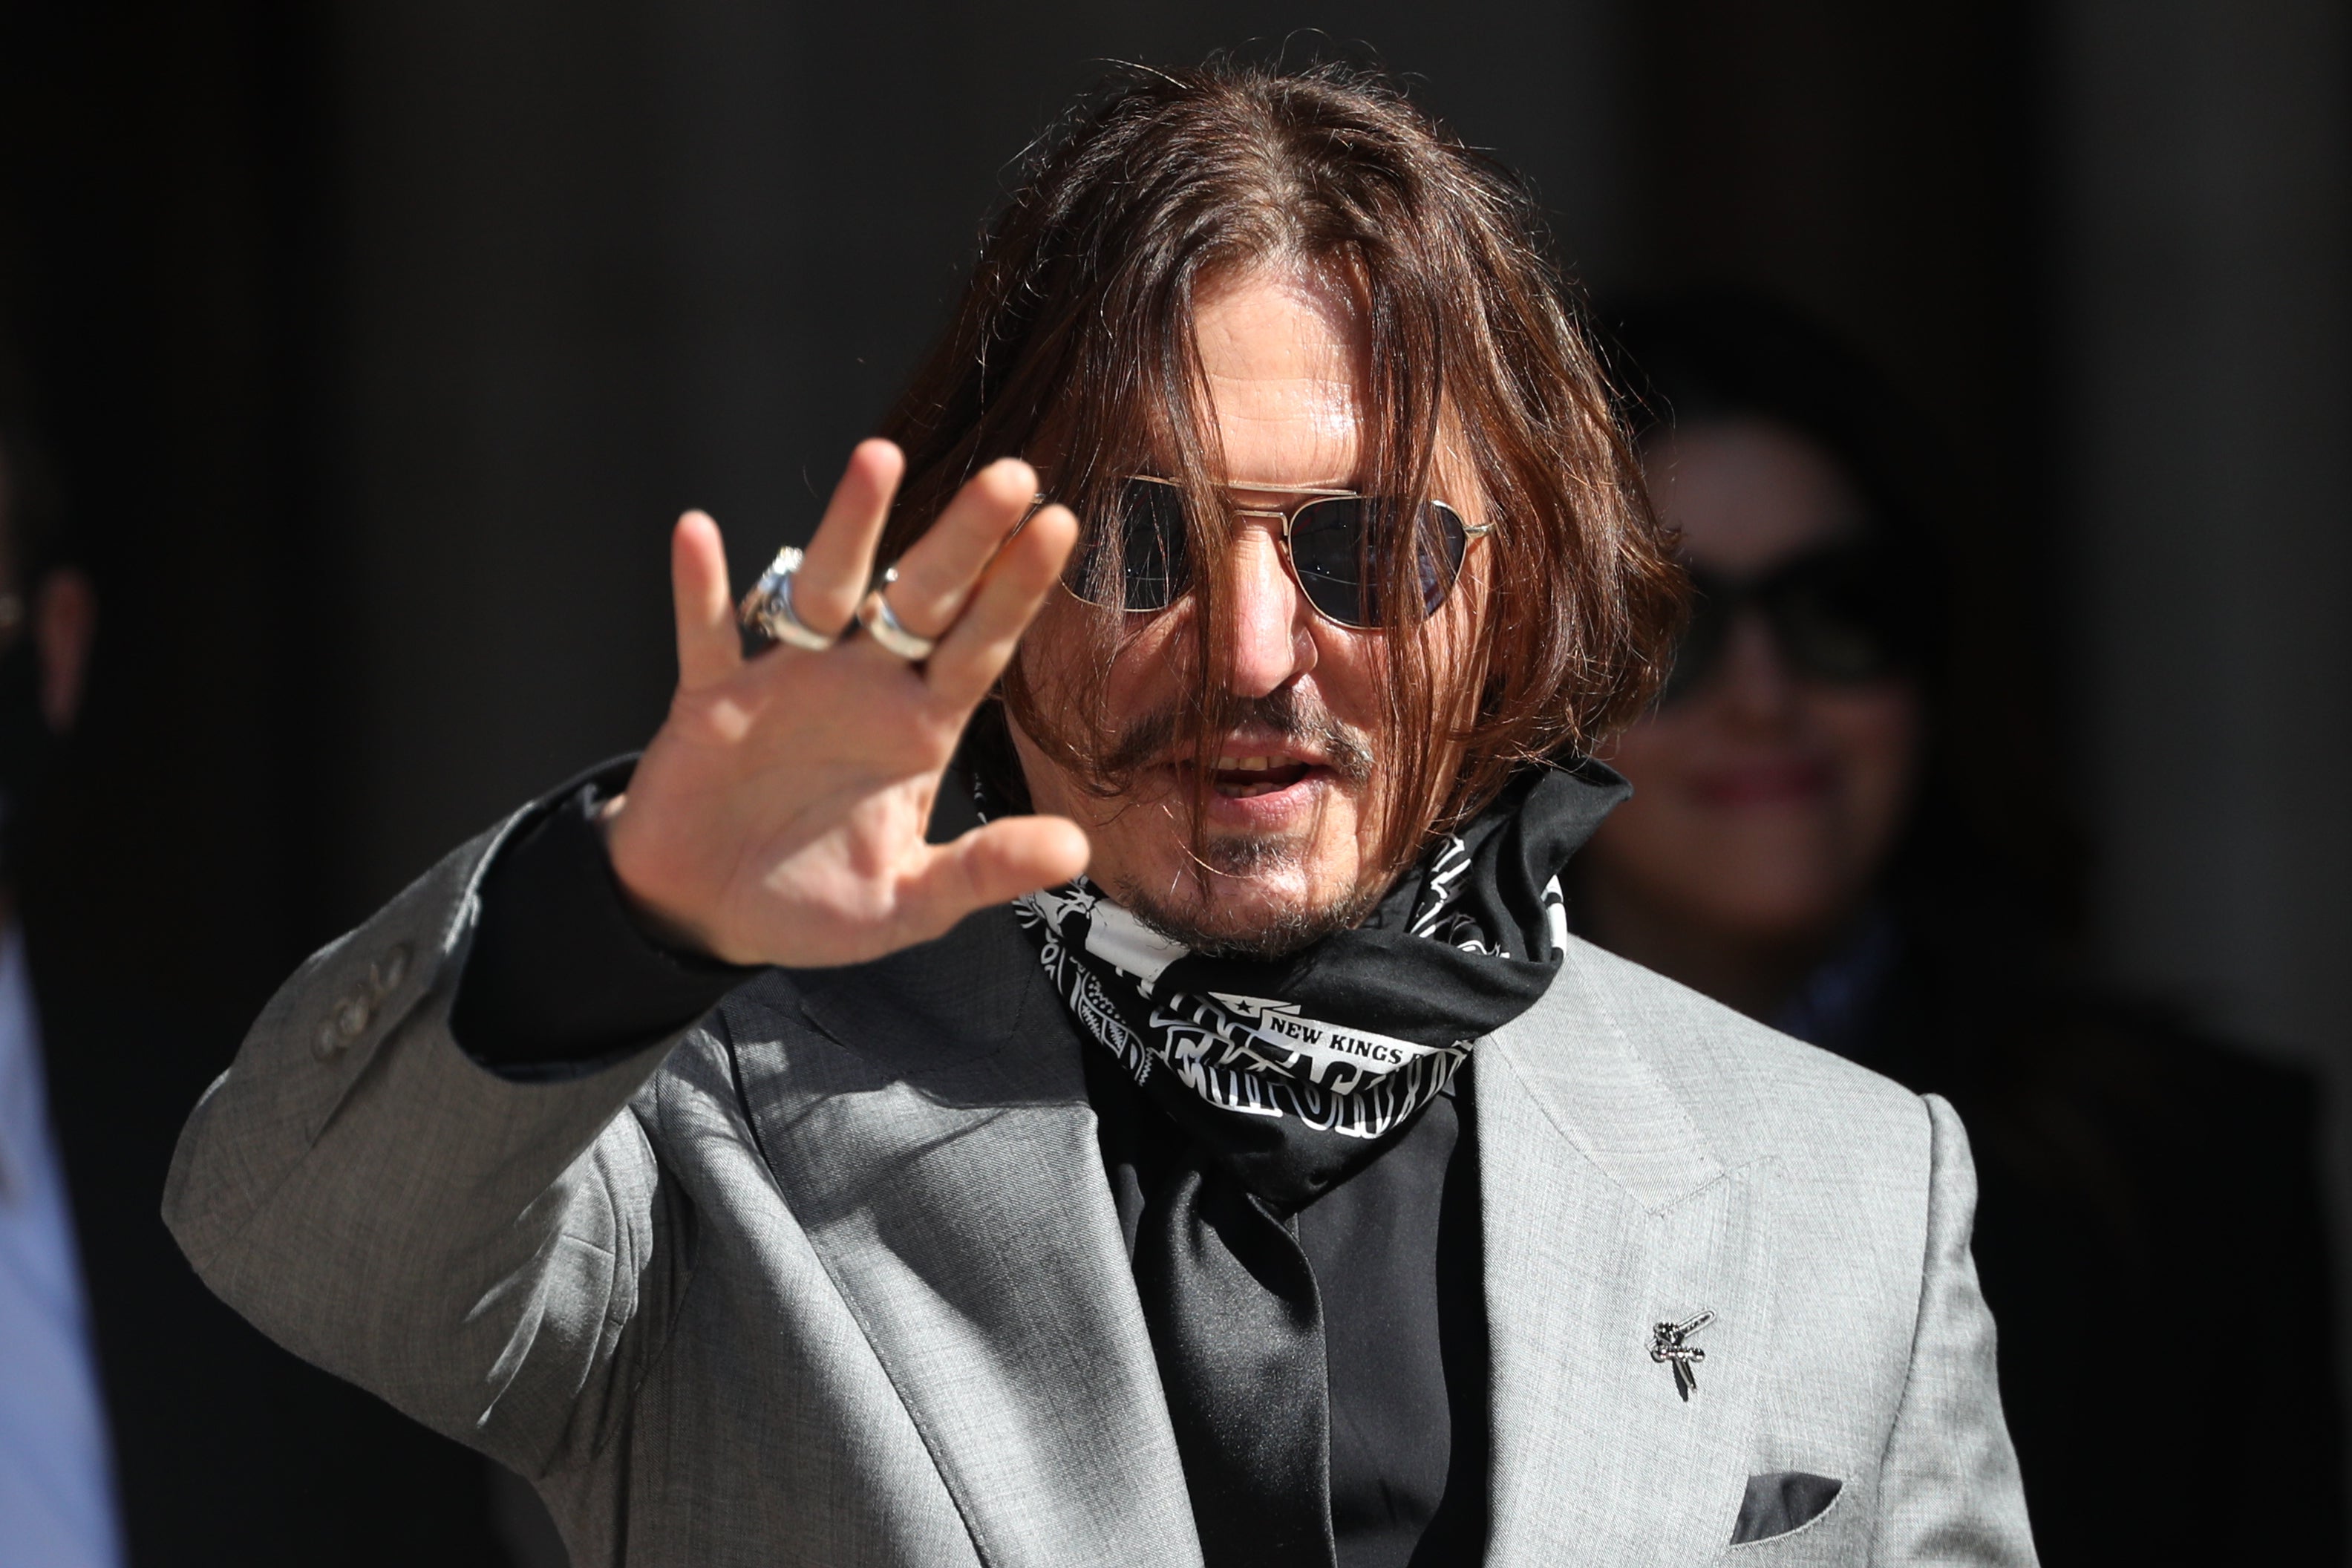 Johnny Depp was awarded 10.35m US dollars (£8.2m) in damages after he sued his ex-wife Amber Heard for defaming him in a 2018 op-ed